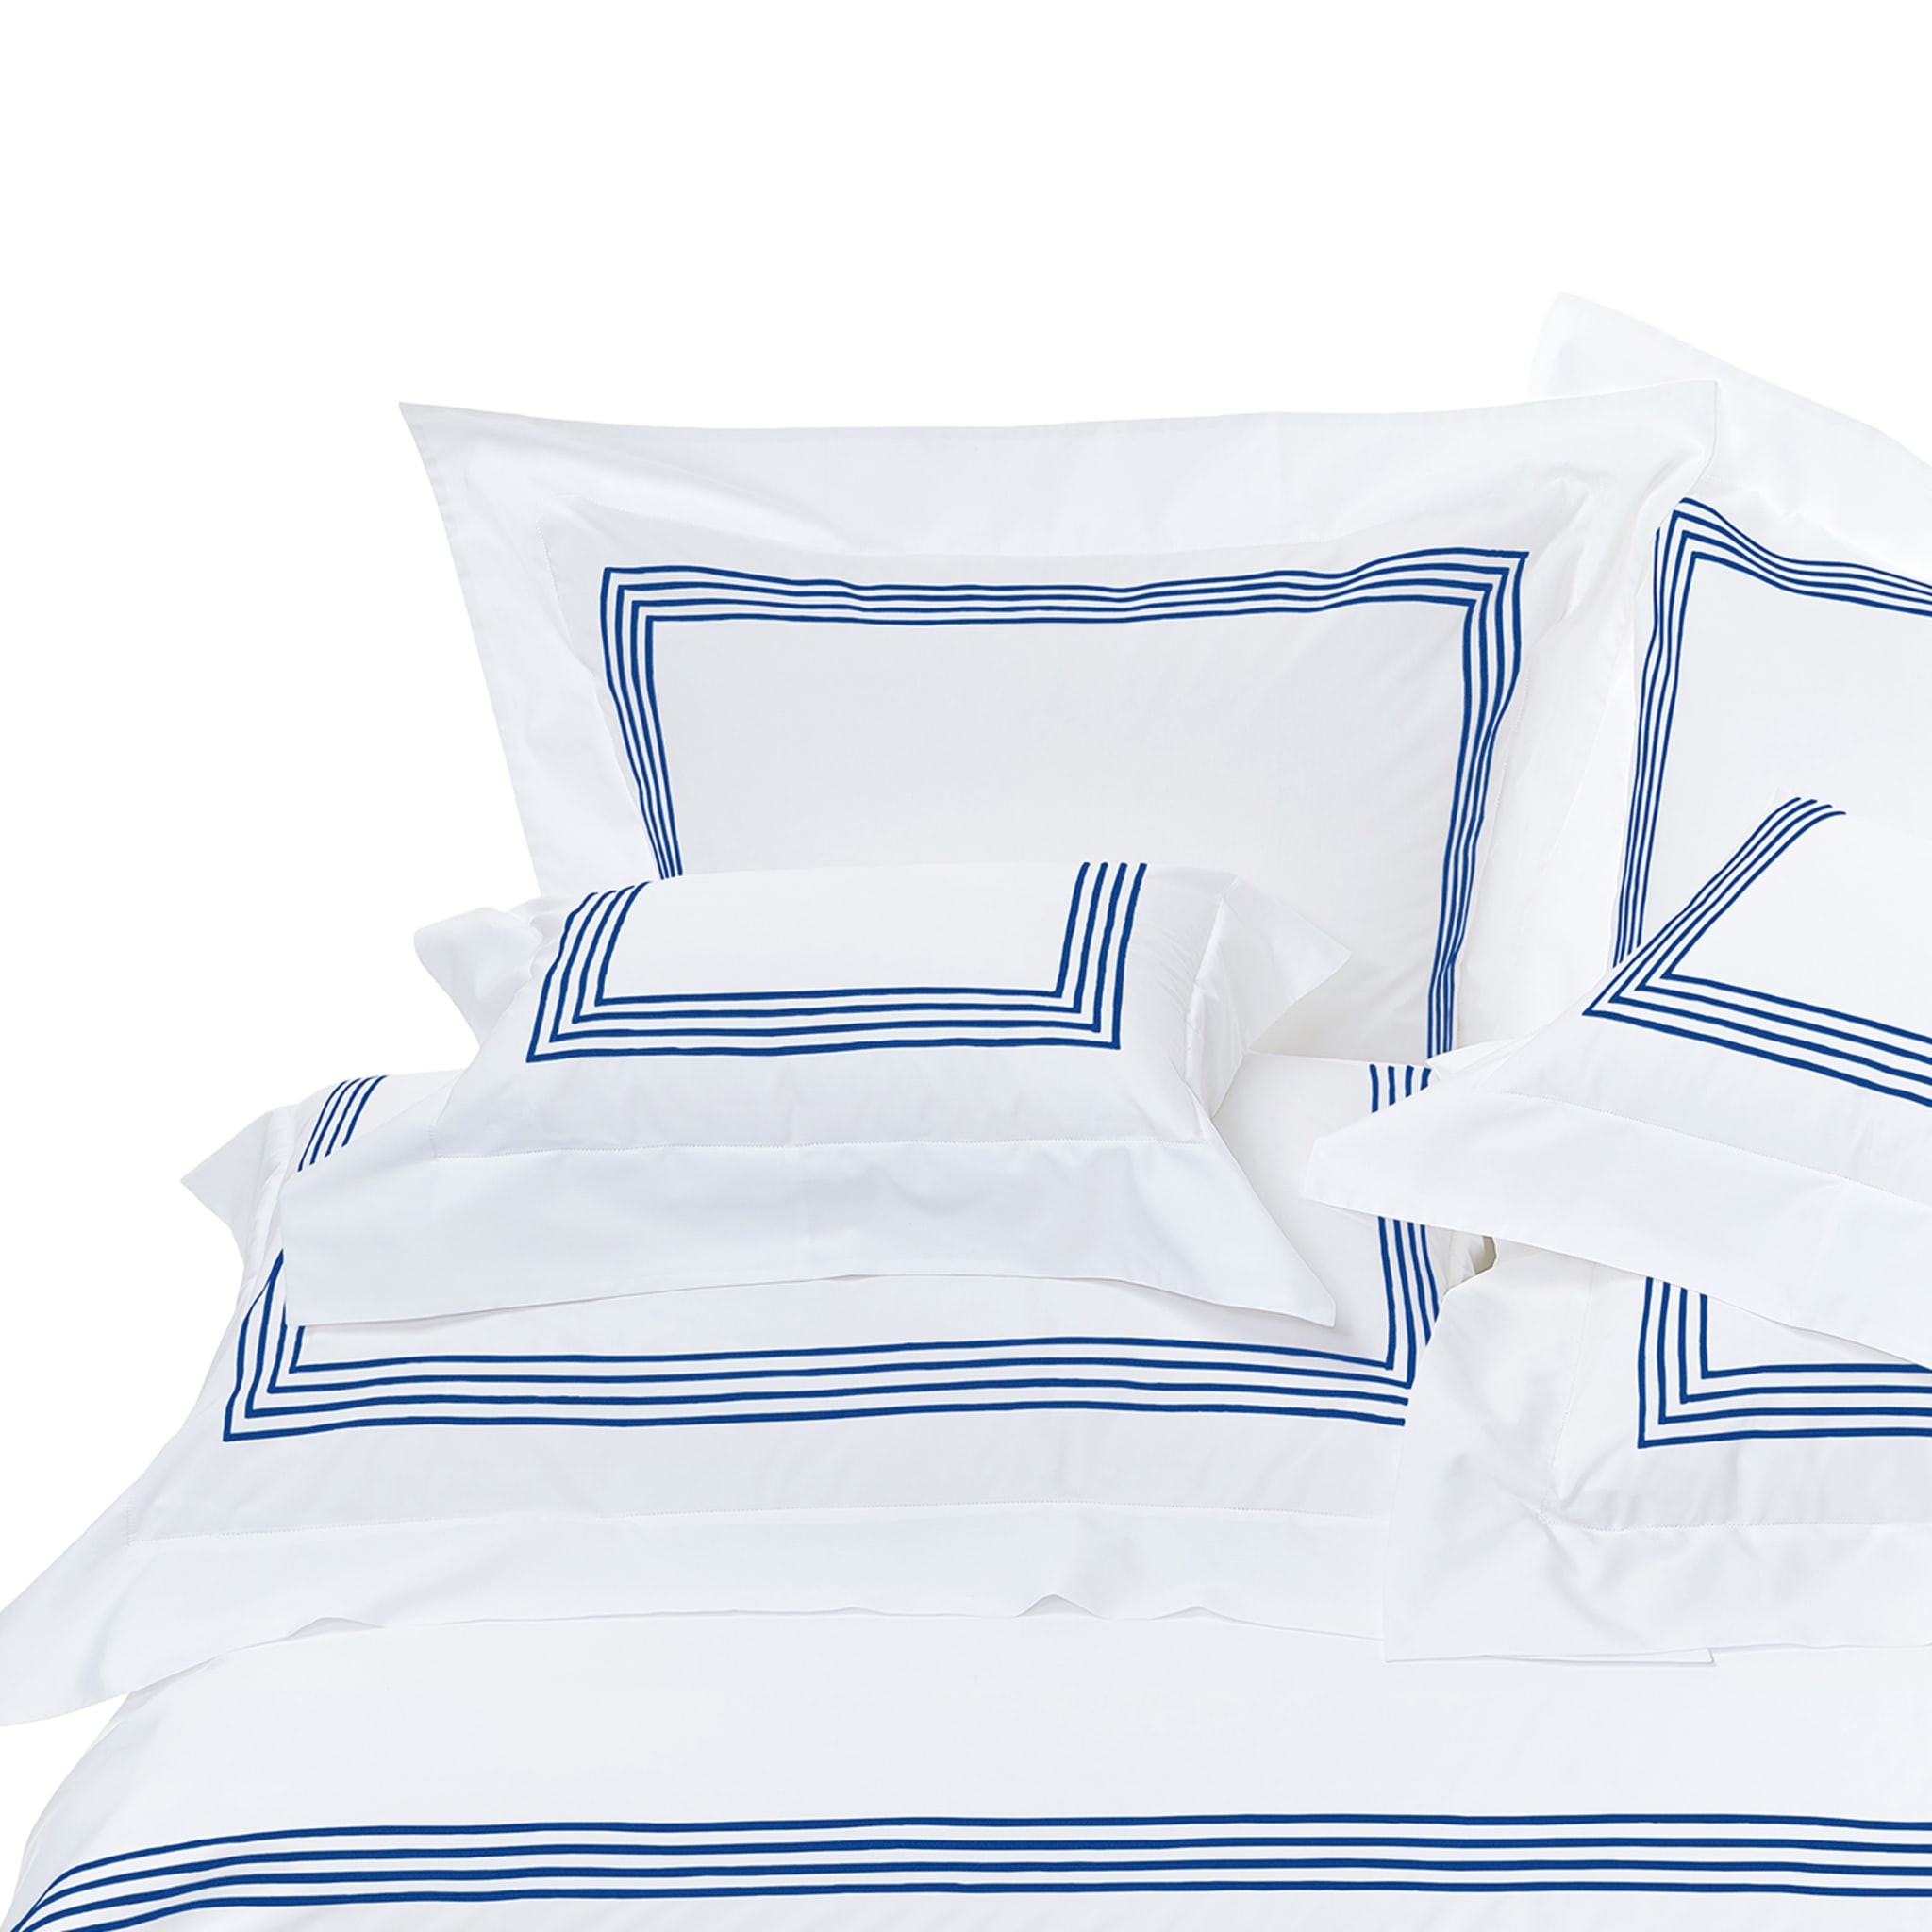 Four Generations White & Bright Blue US King Duvet Cover - Alternative view 3